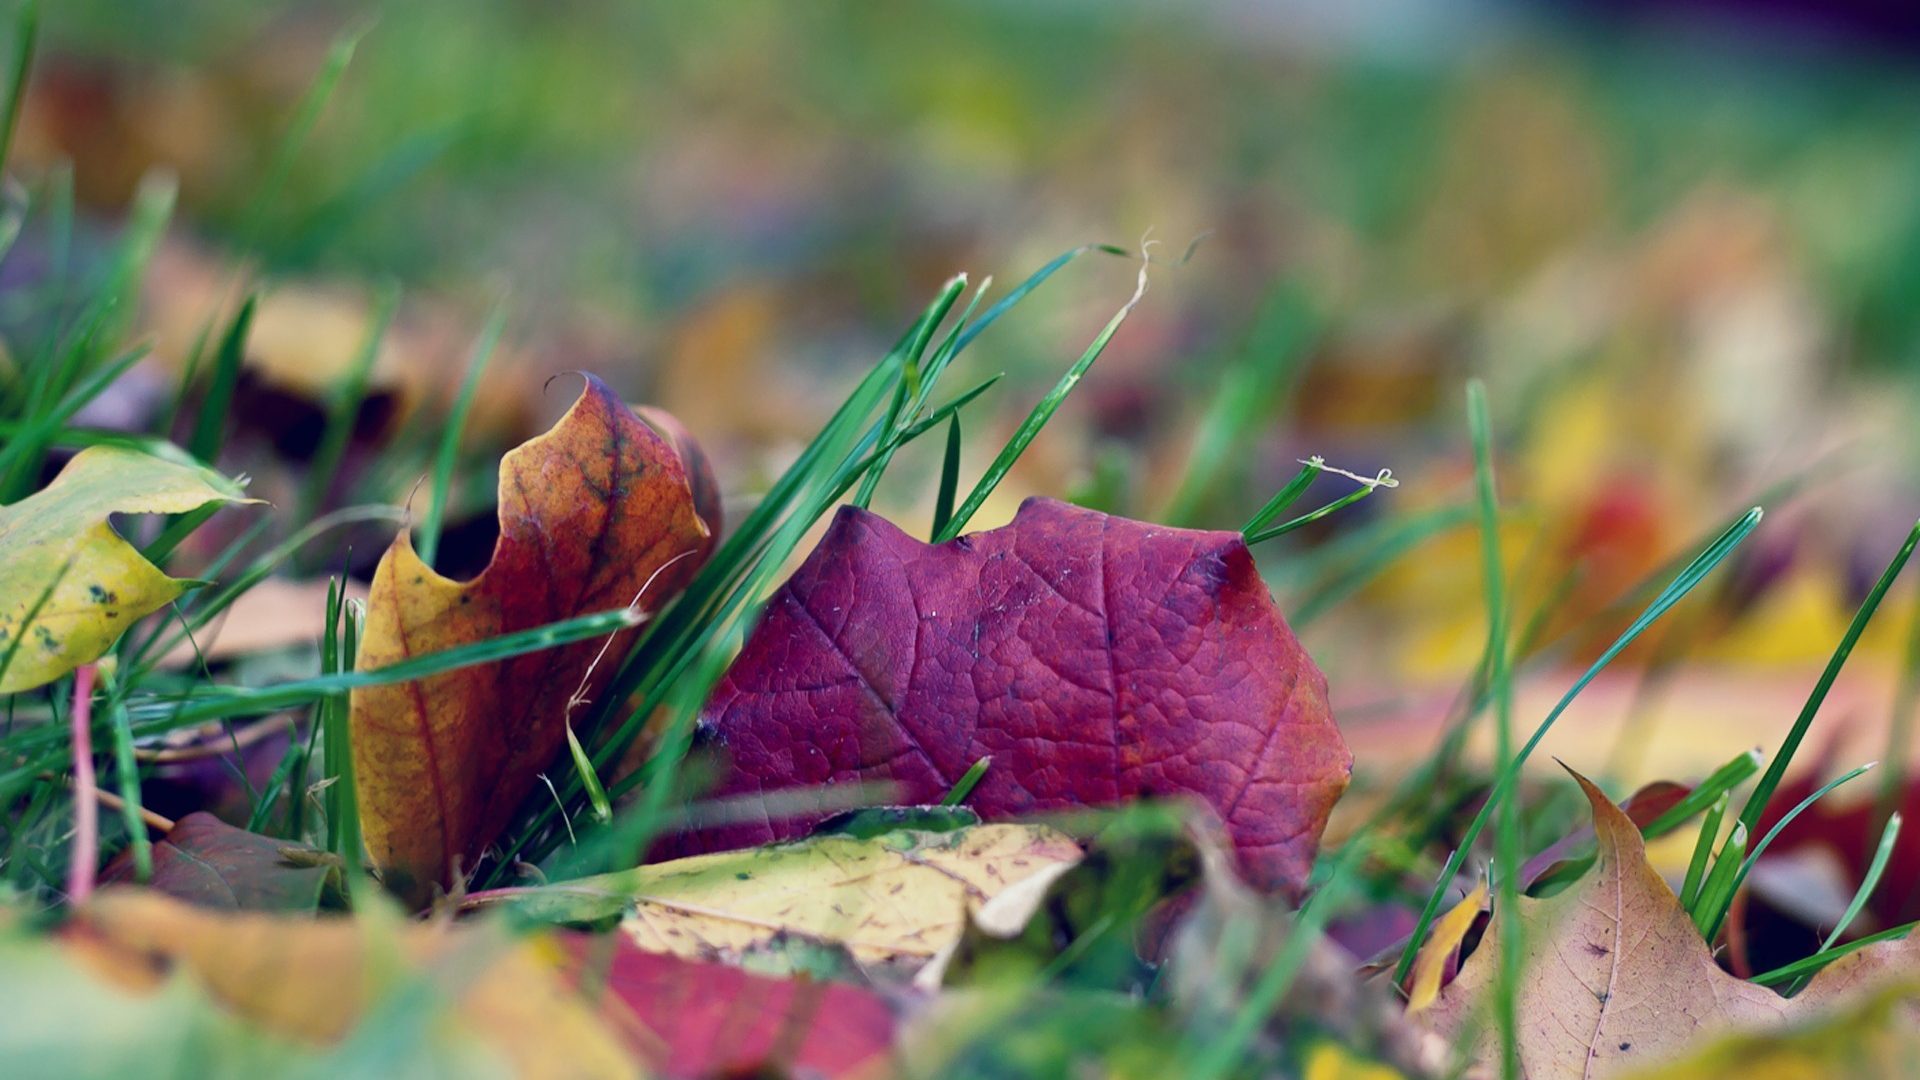 leaves-leaf-grass-nature-full-hd-pictures-1920x1080.jpg